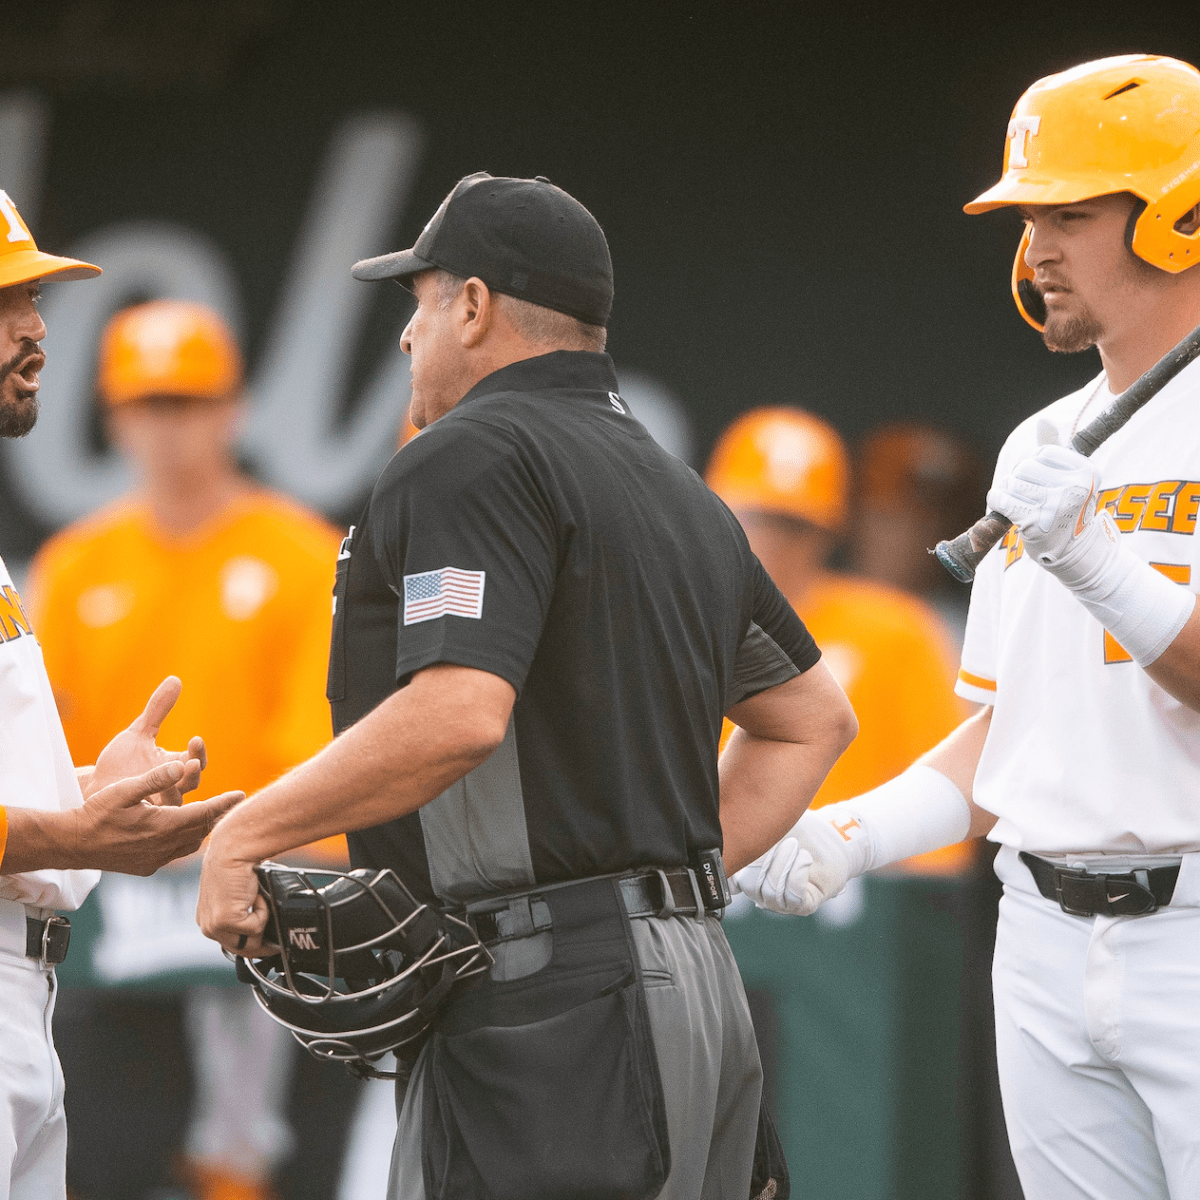 Team Tennessee baseball thrived with top underclassmen